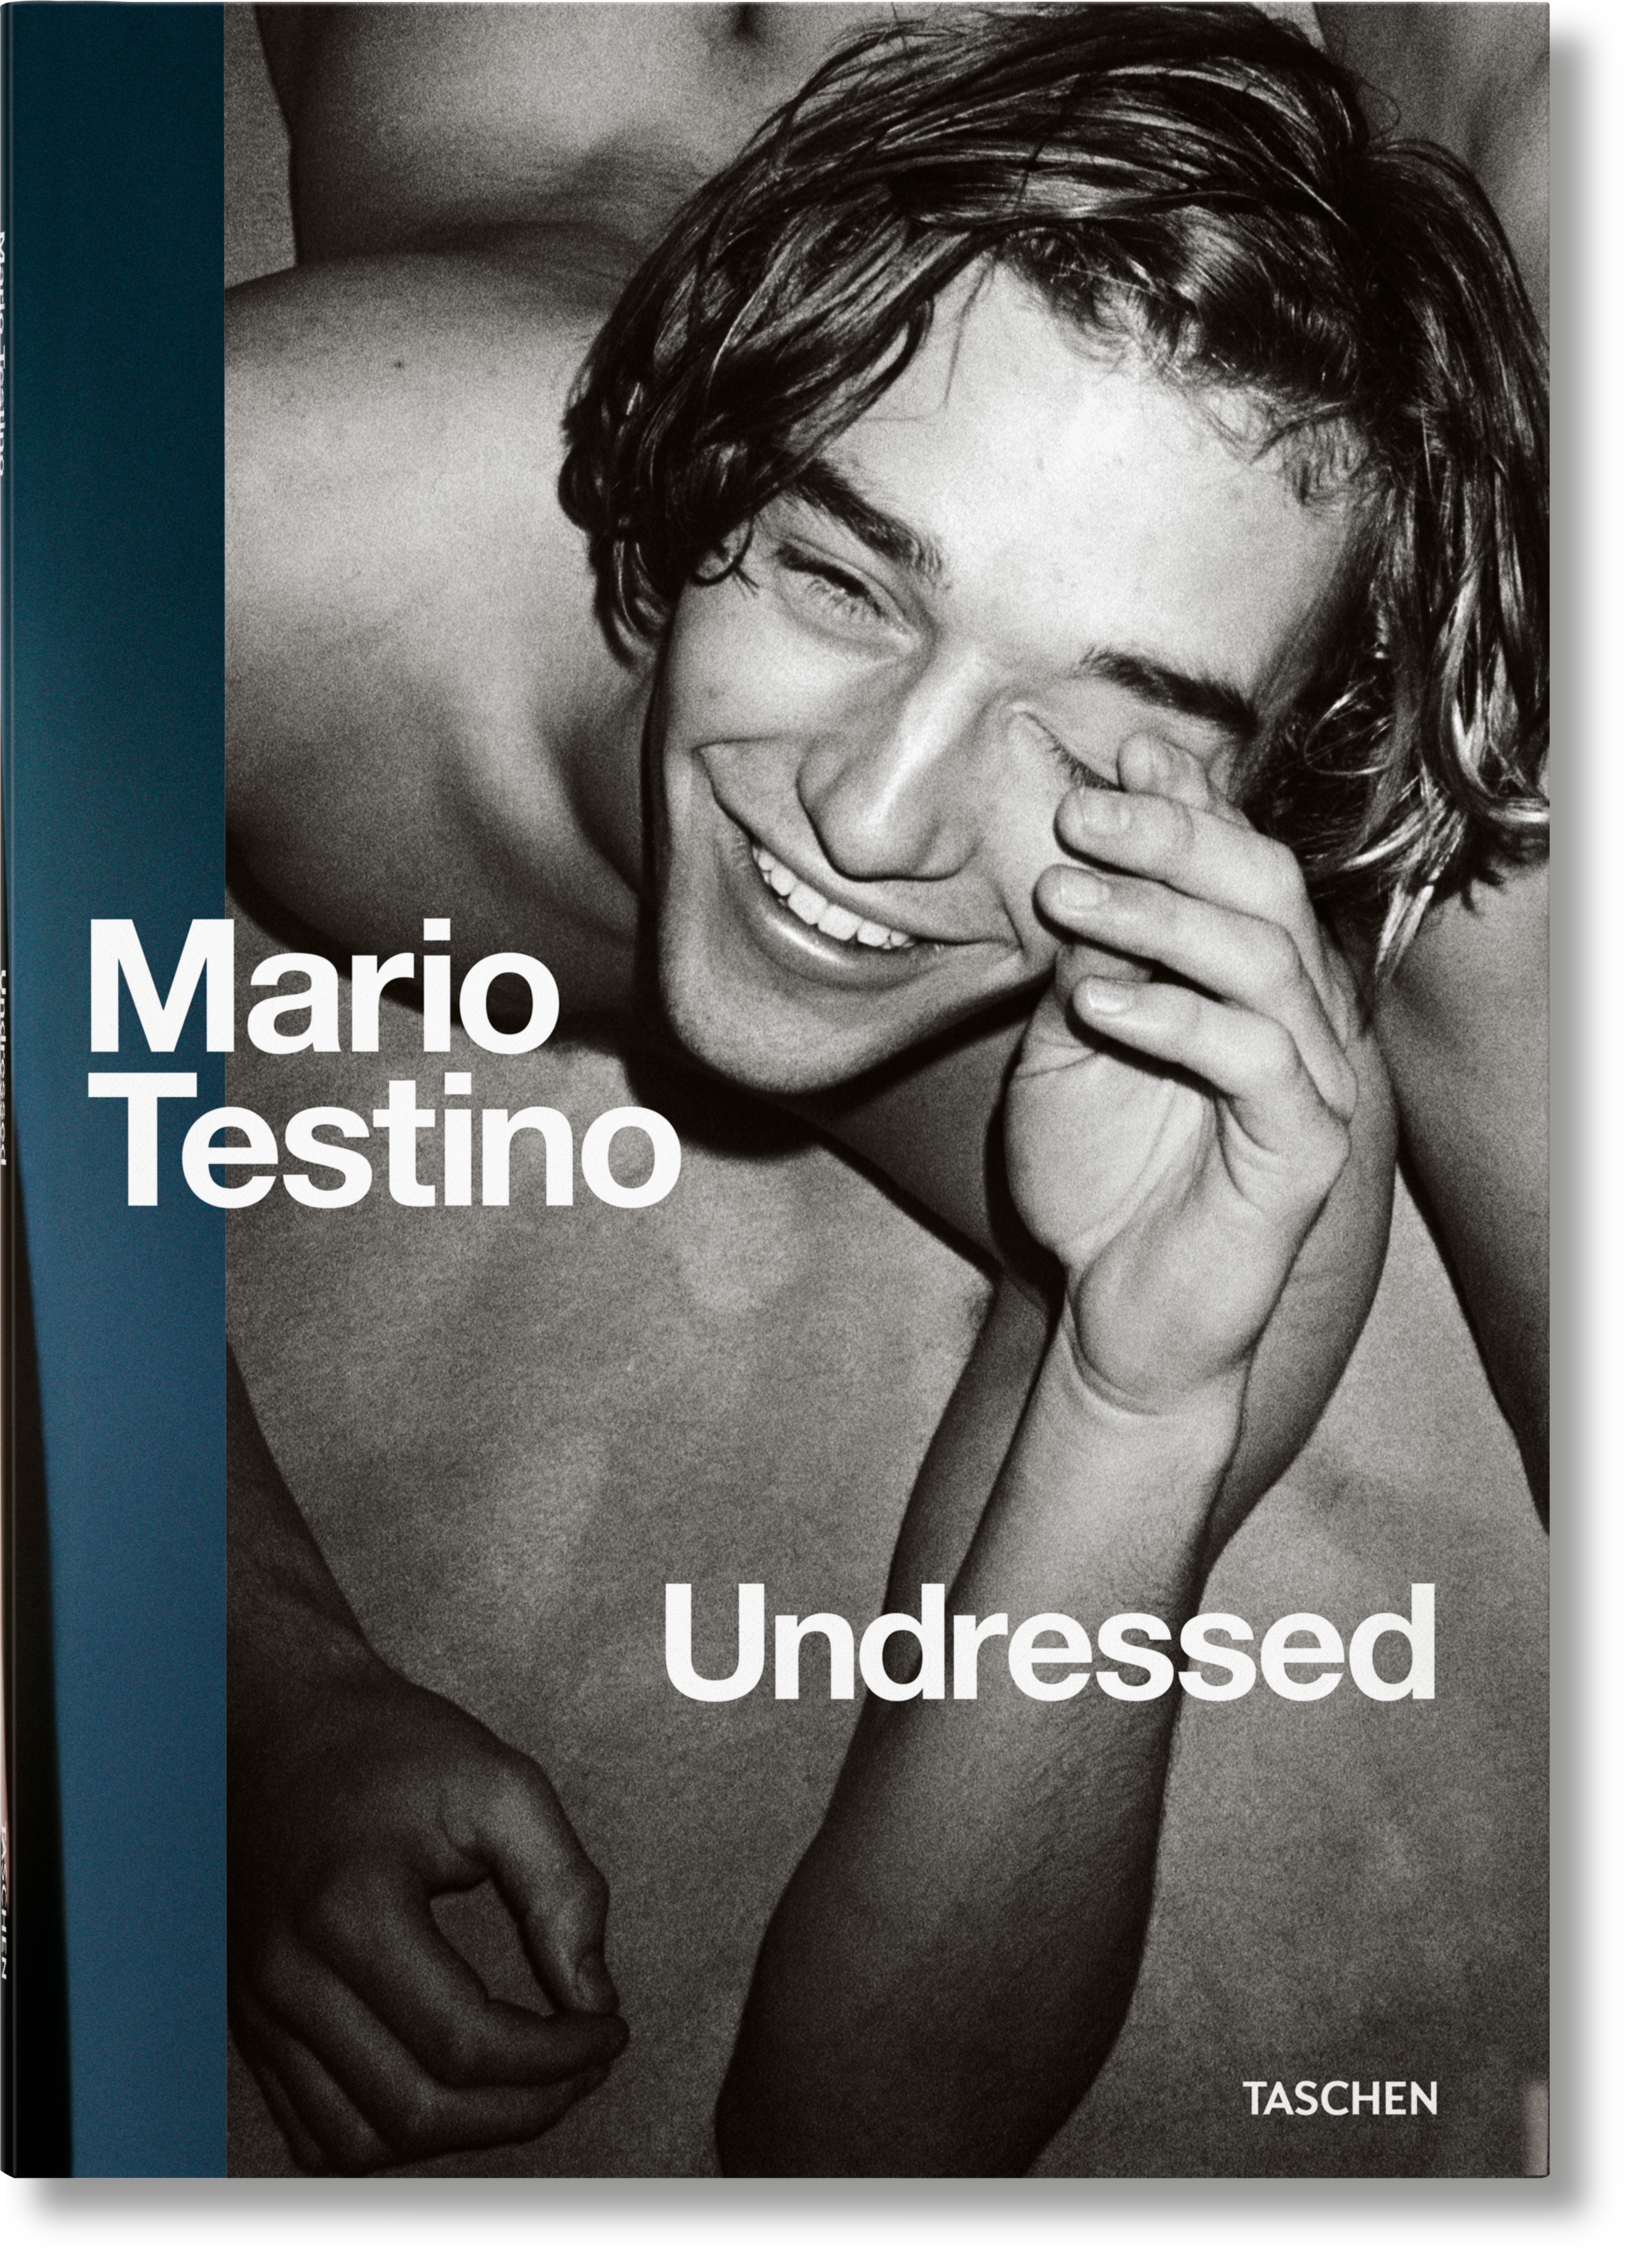 testino_undressed_fo_int_3d_05322_1705091033_id_1124272.png